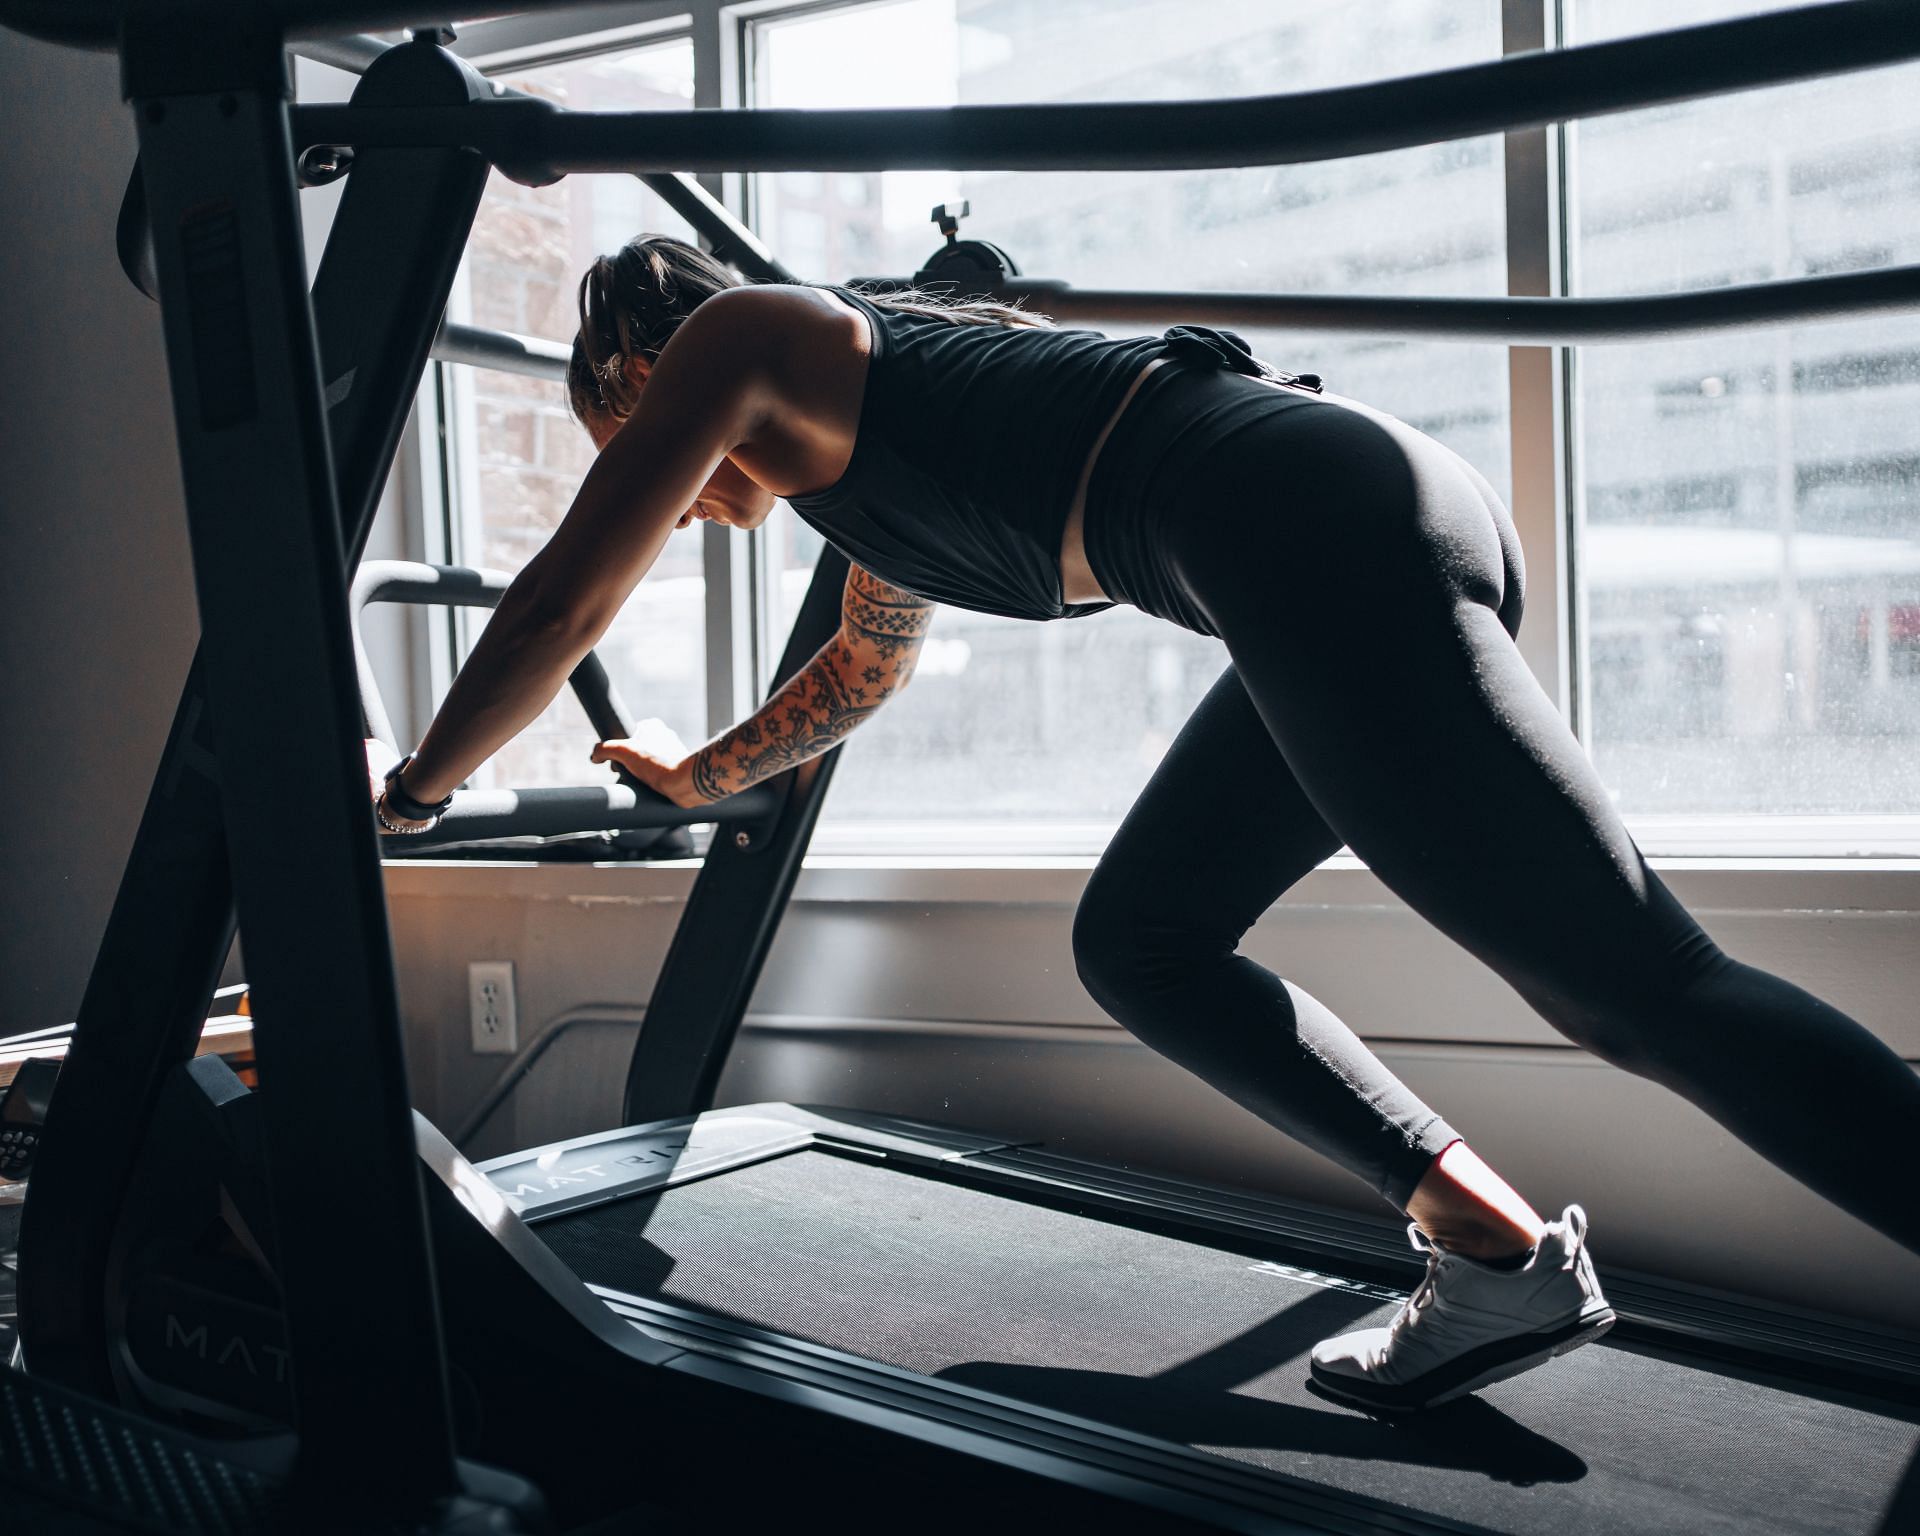 Best exercise machines to get total body workout. (Image via Unsplash/Graham Mansfield)